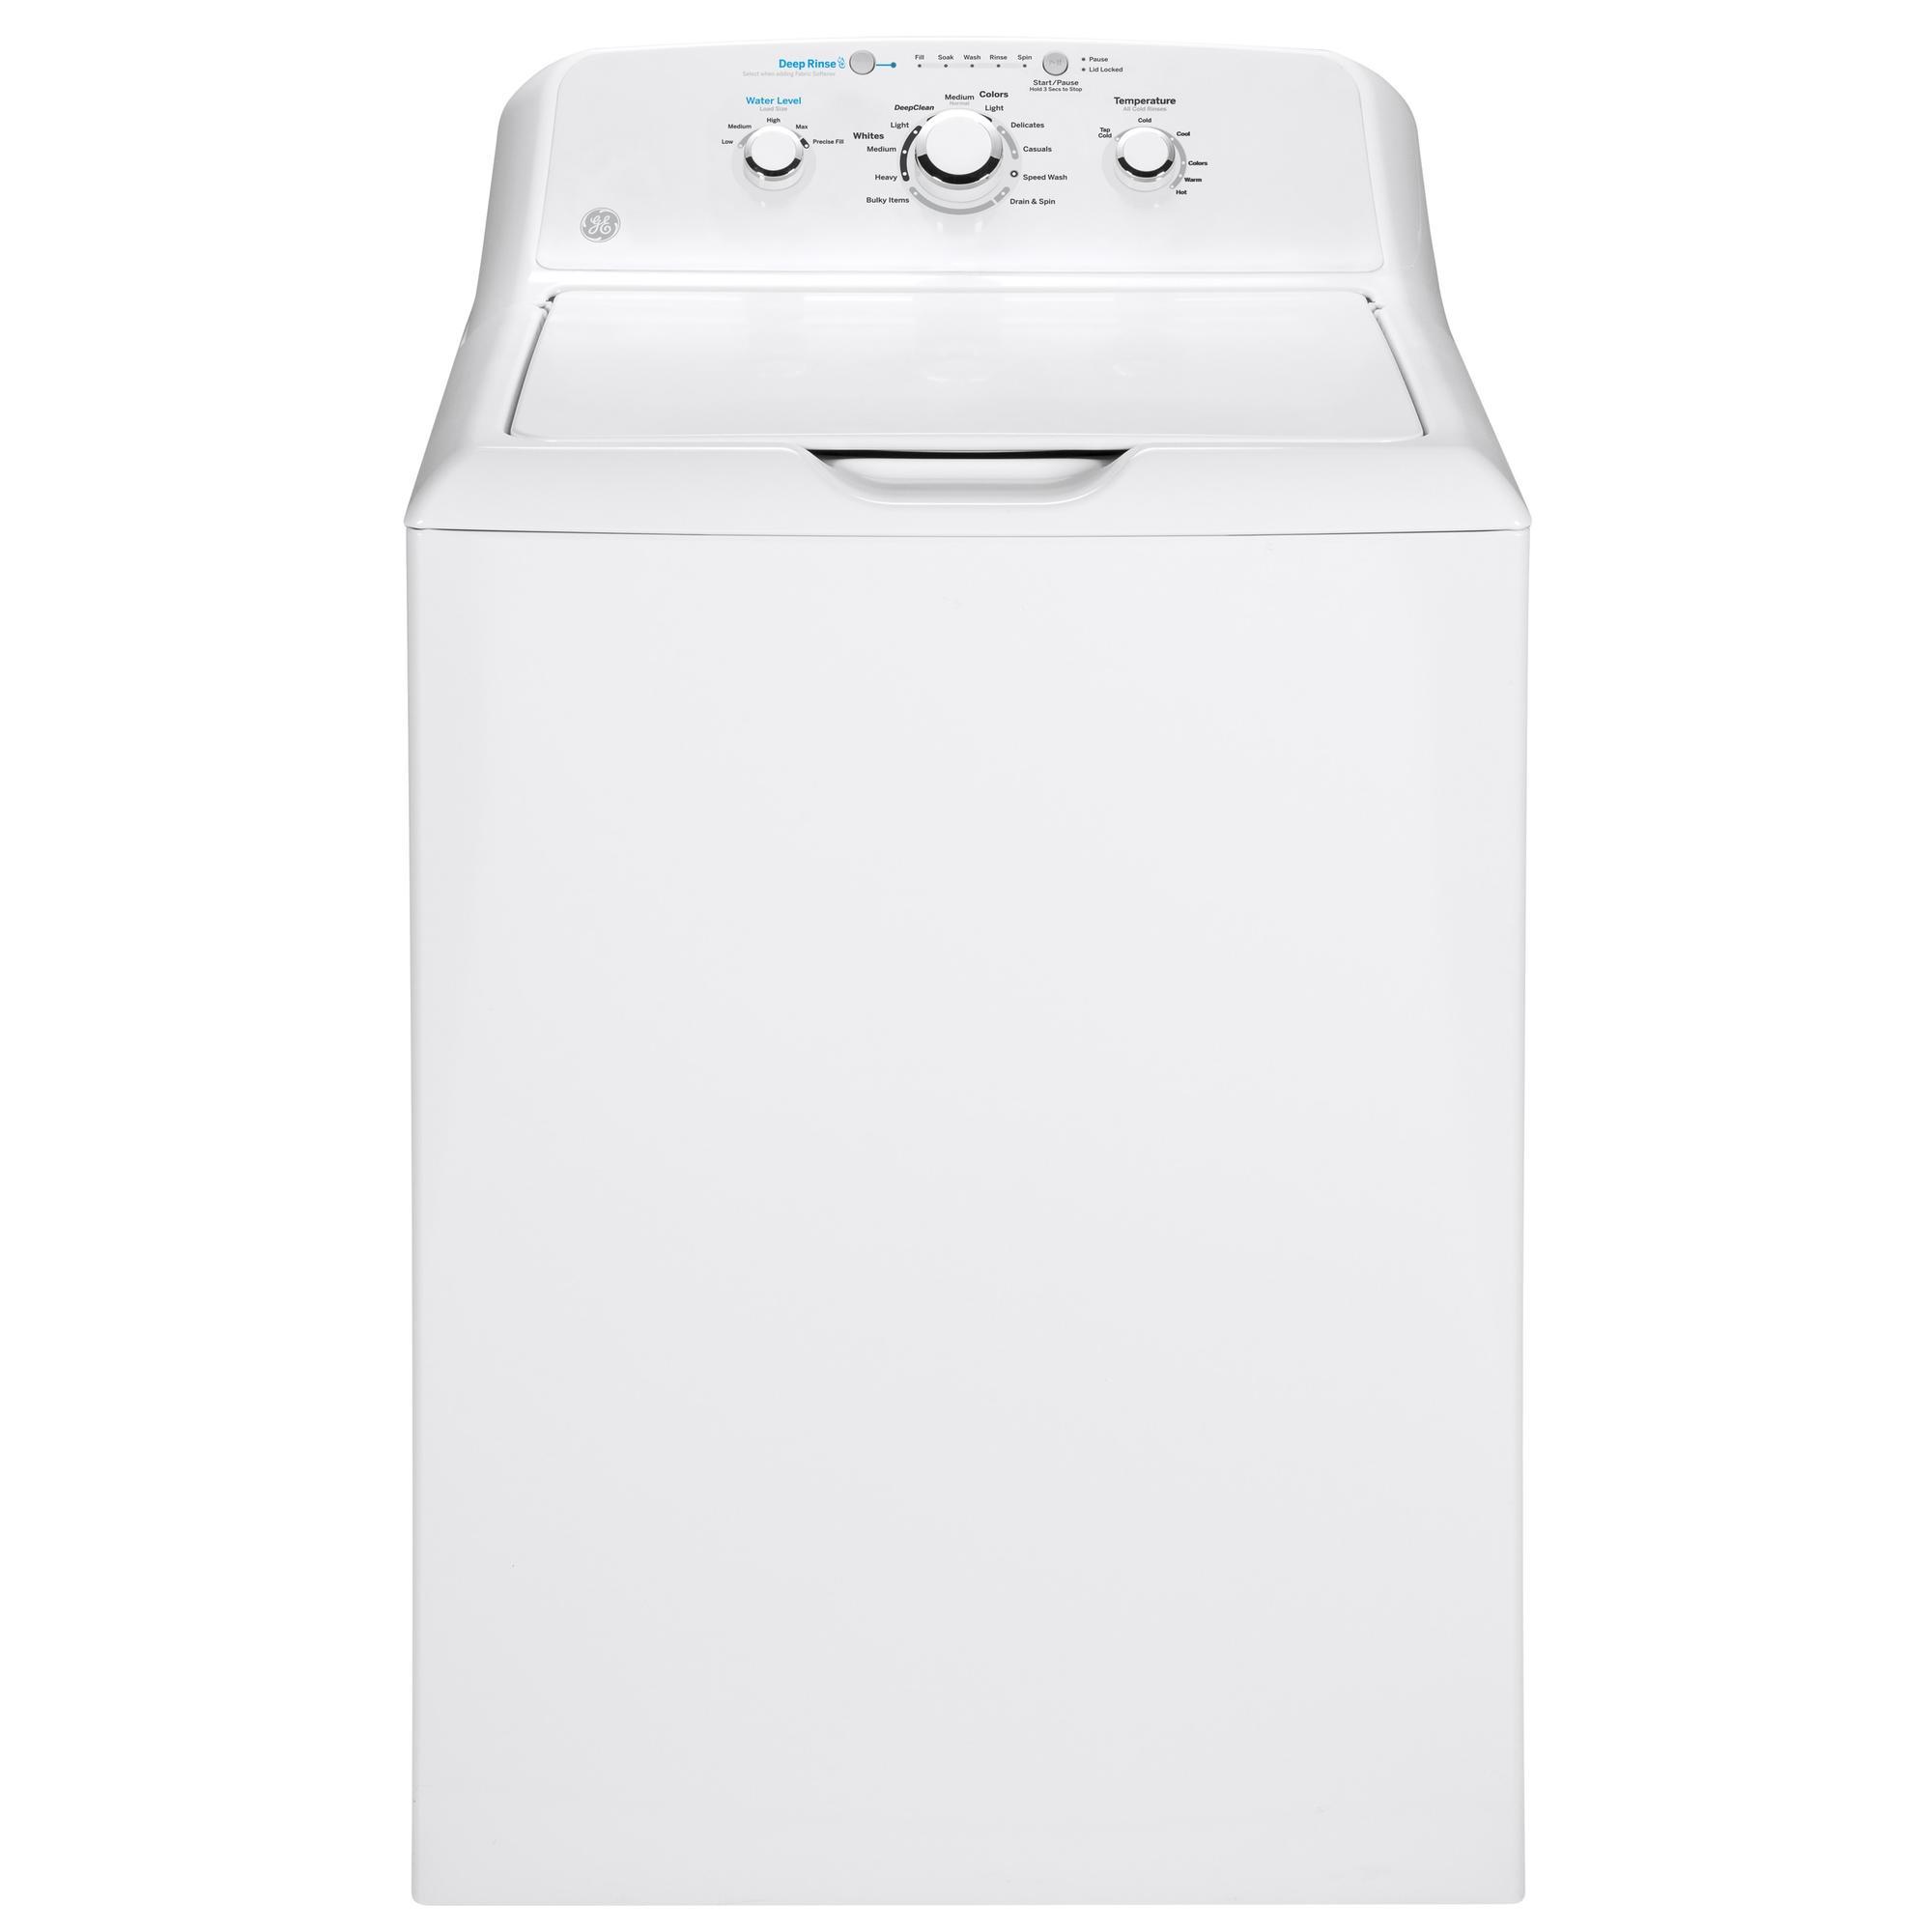 GE GTW335ASNWW 4.2 cu. ft. Washer with Stainless Steel Basket - White